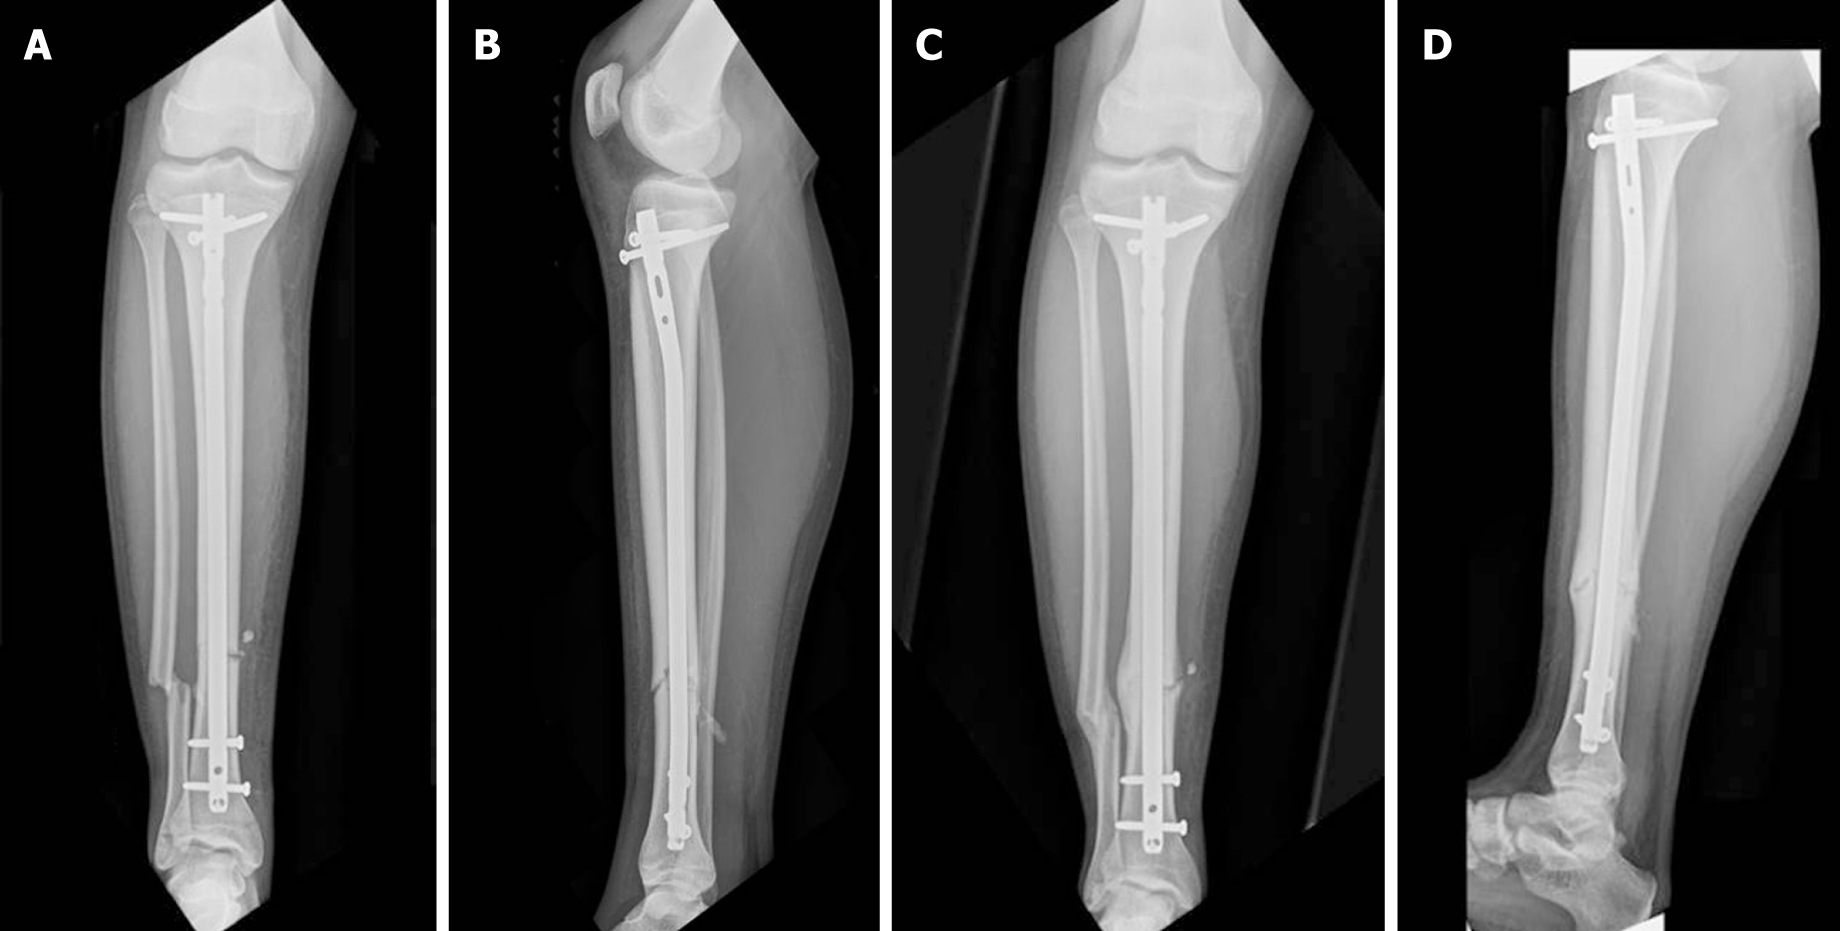 Rigid locked nail fixation for pediatric tibia fractures - Where are the  data?